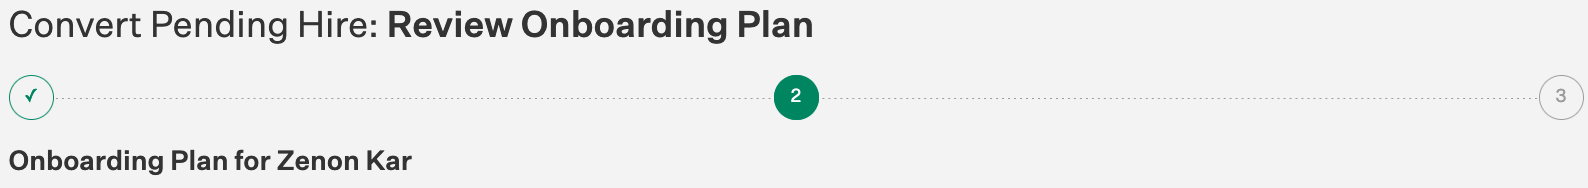 Review_Onboarding_Plan___Greenhouse_Onboarding.png